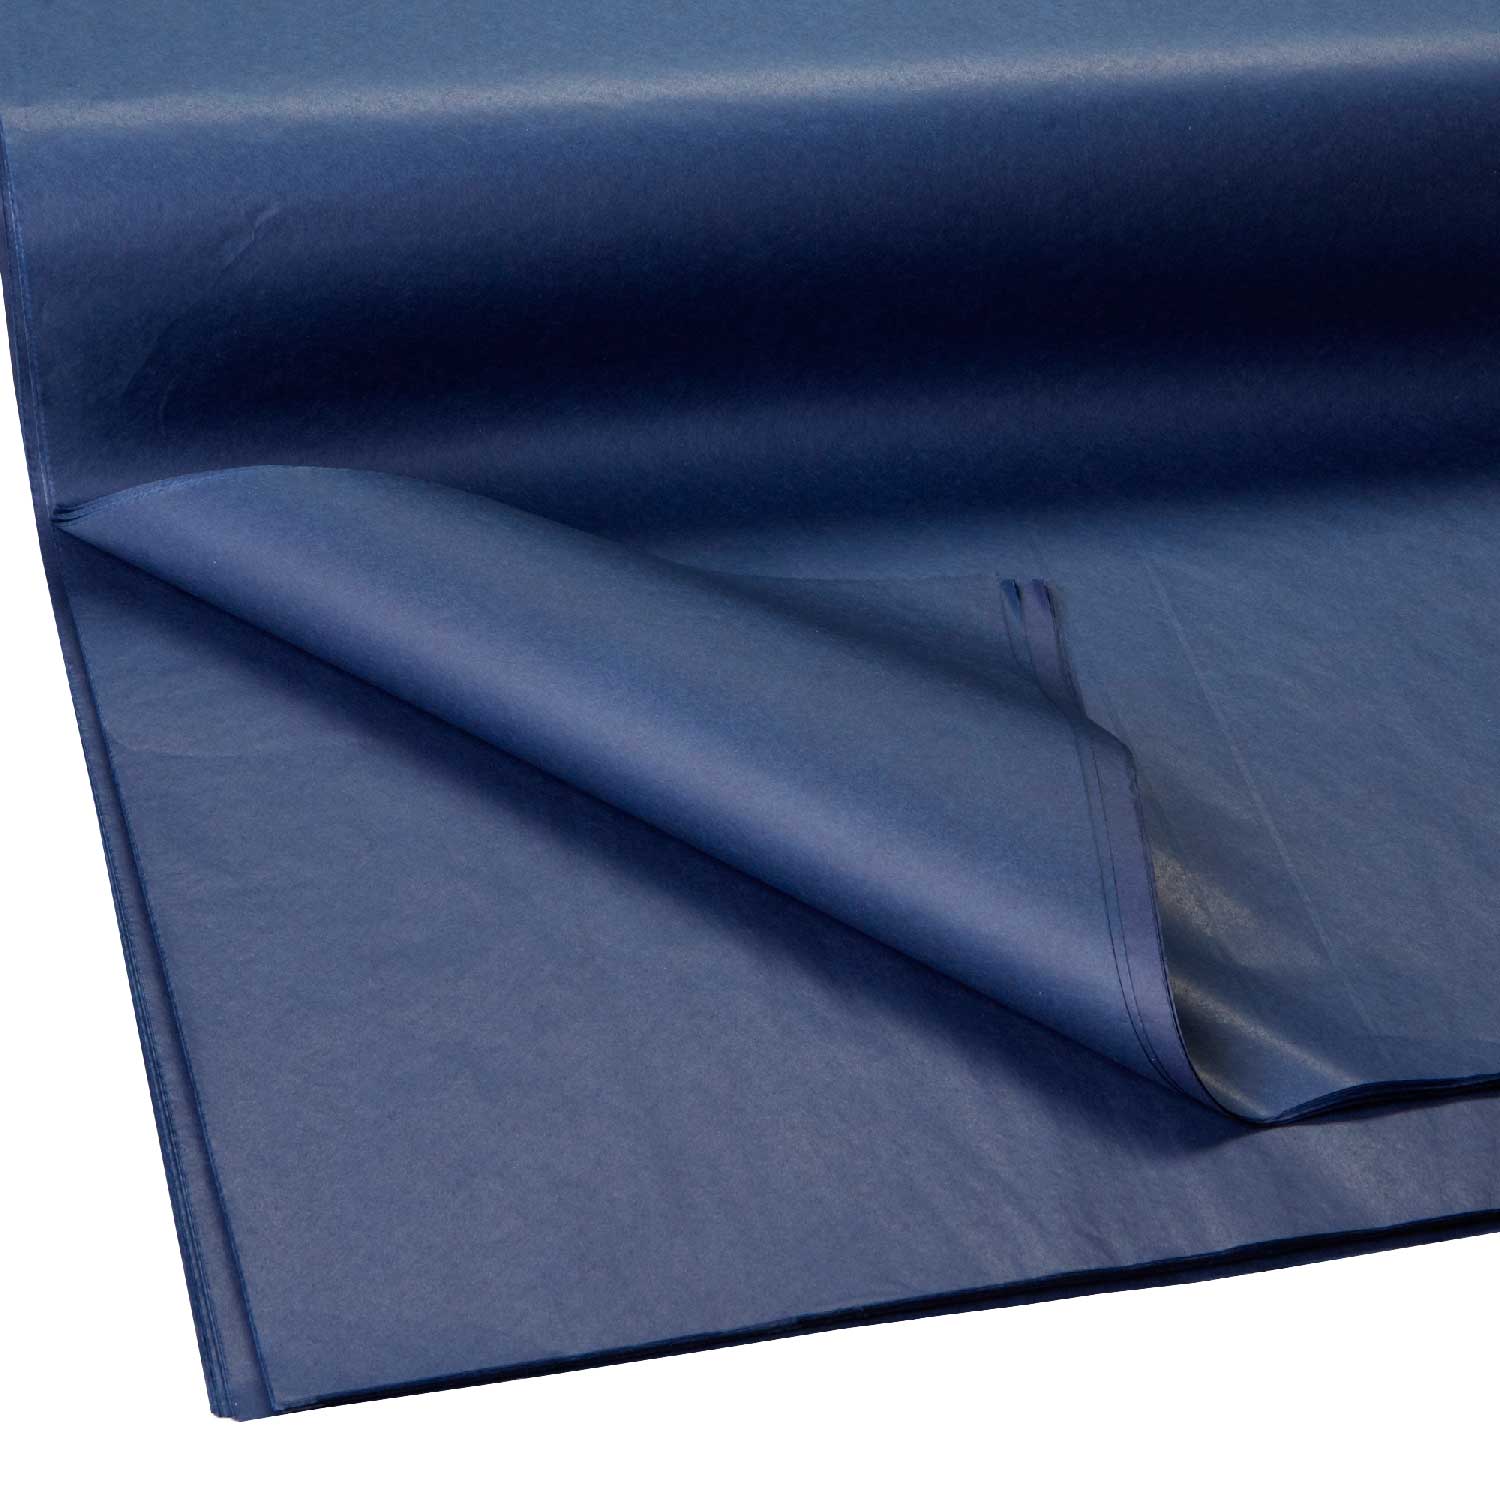 Uxcell Gift Wrap Tissue Paper Navy Blue 20 x 26 for Gift Bags